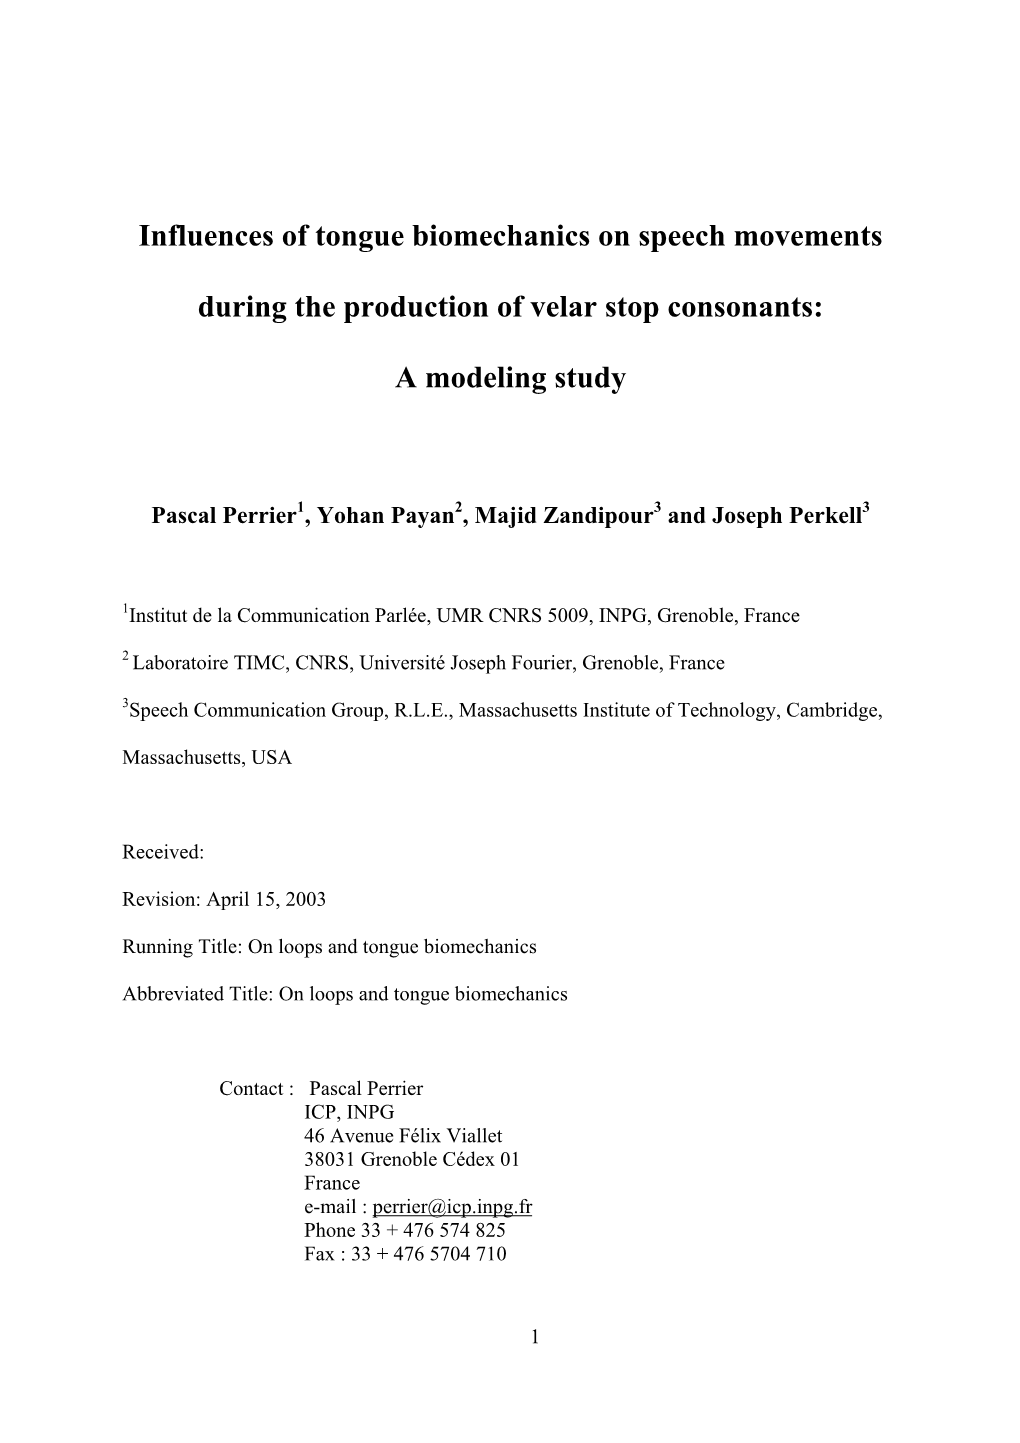 Influences of Tongue Biomechanics on Speech Movements During The